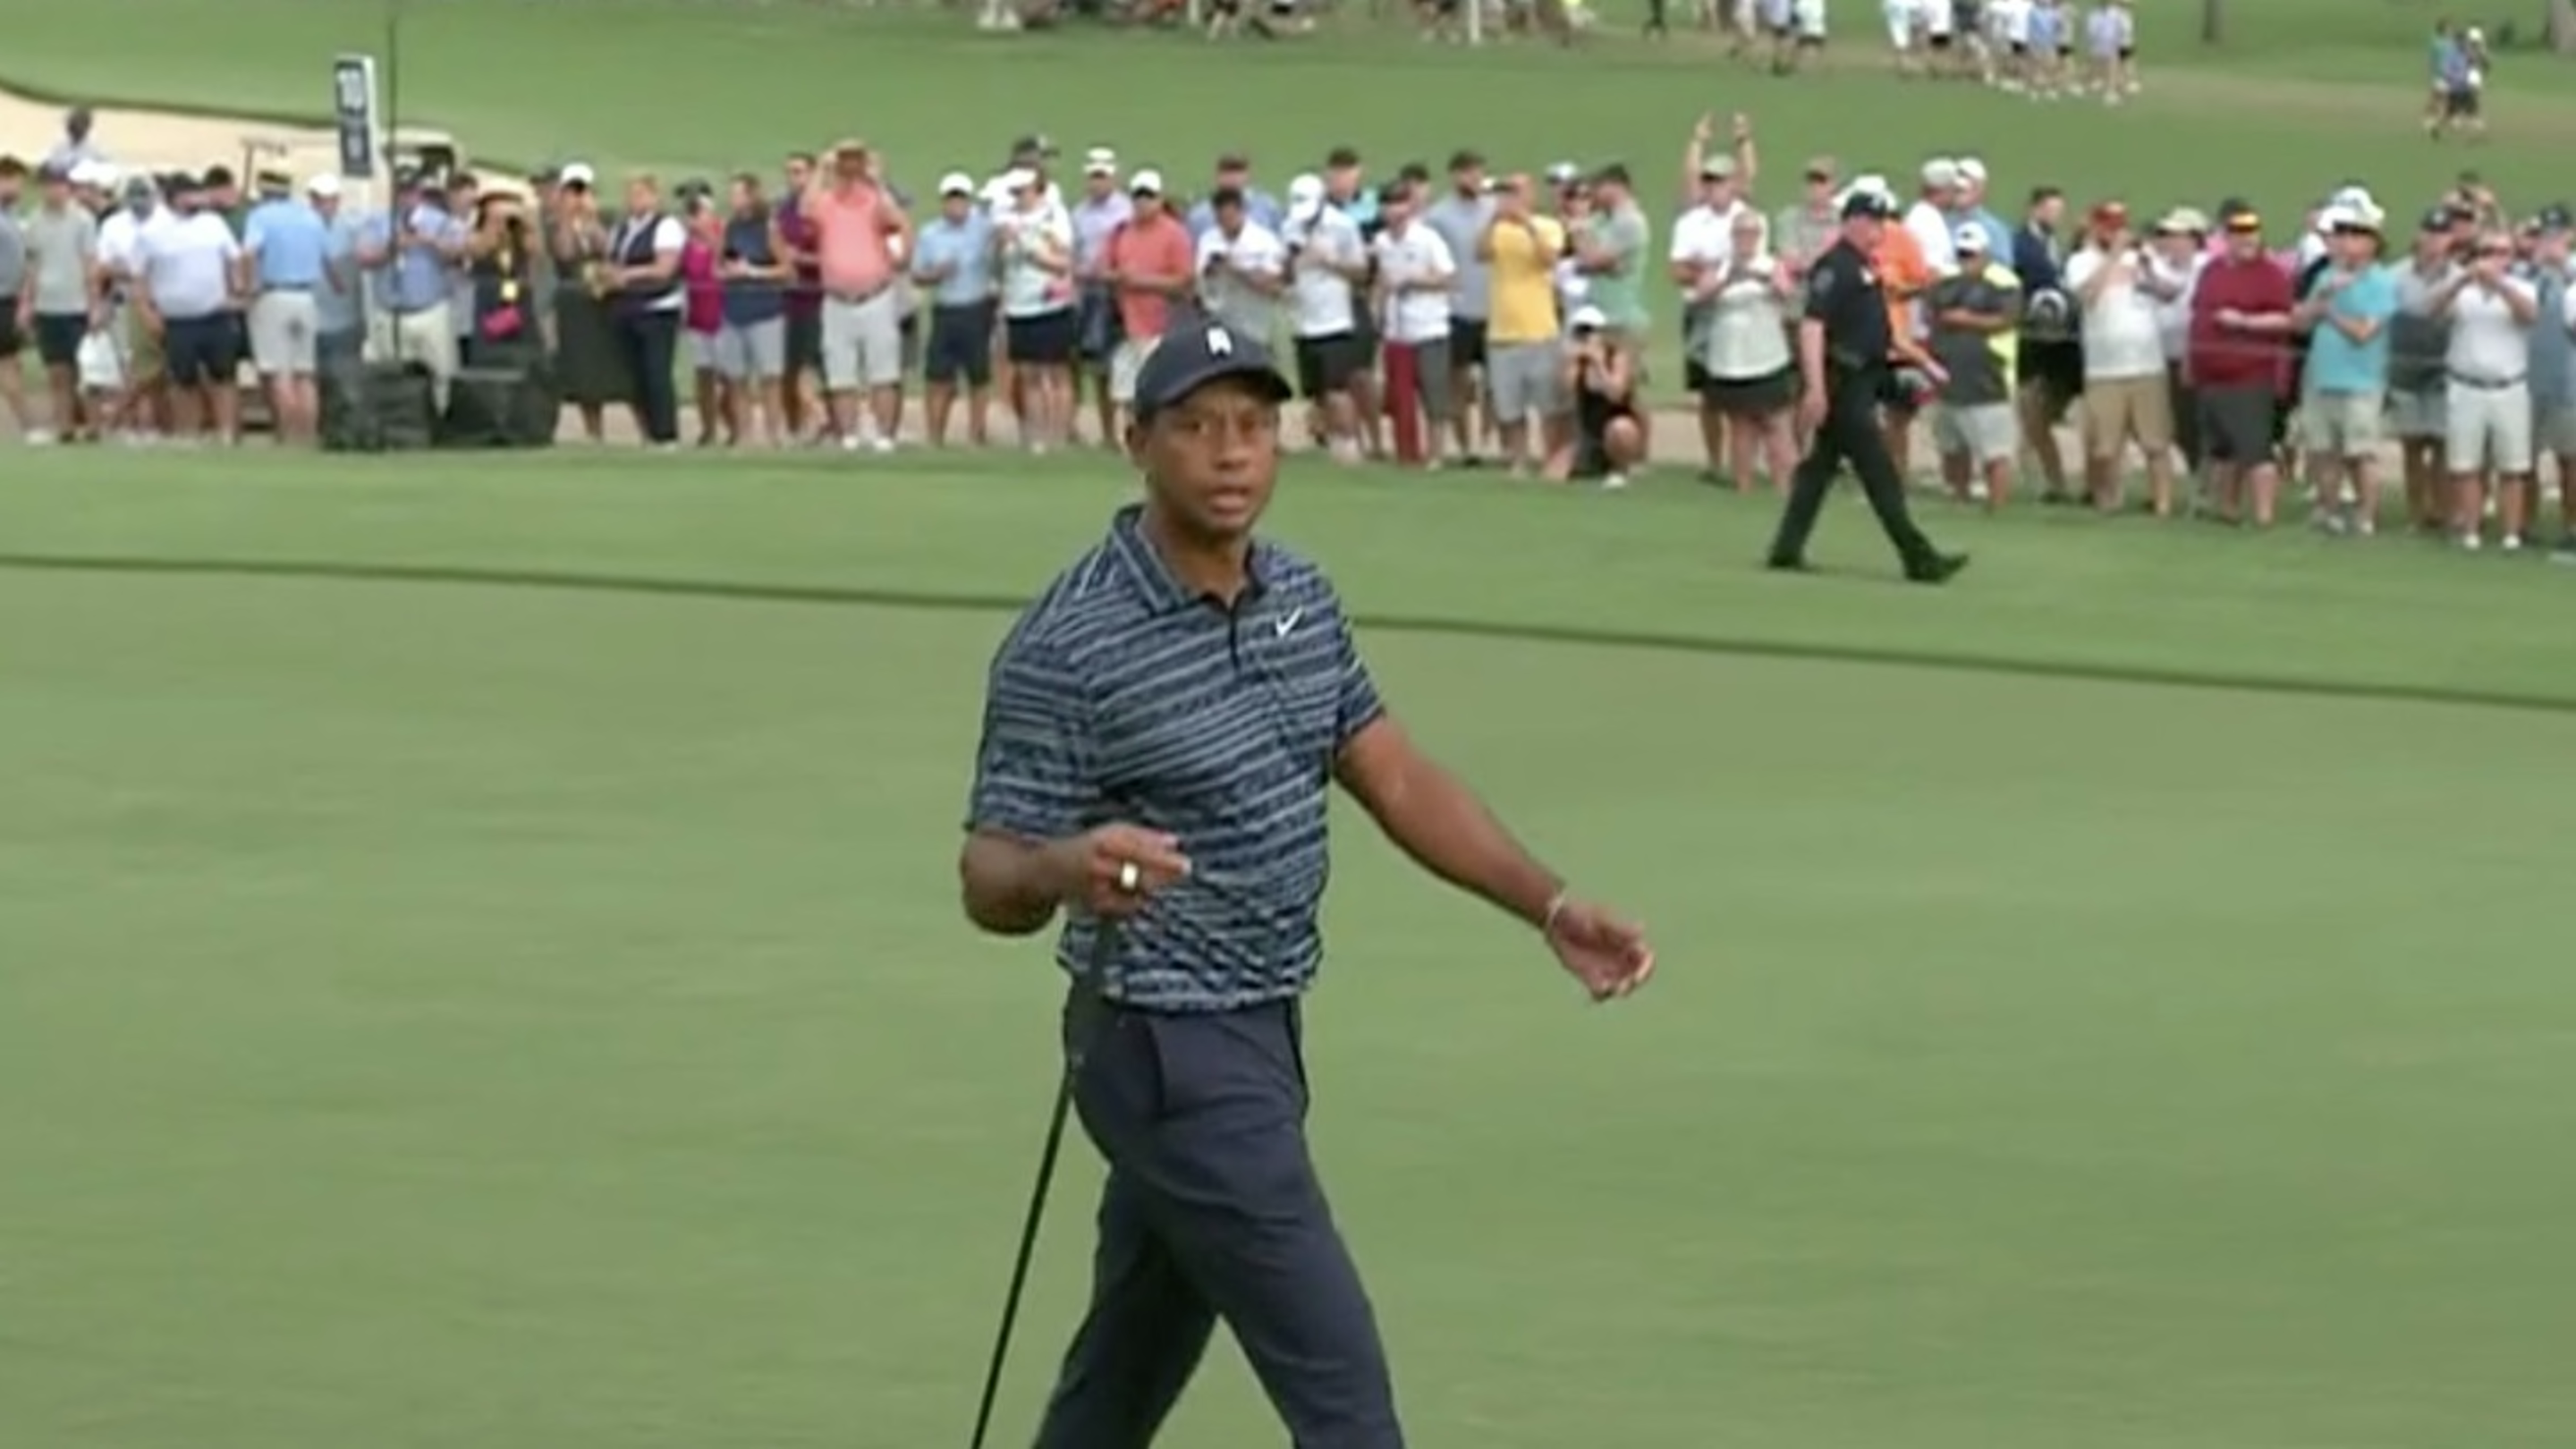 Tiger Woods Tells Camerman to Back Off Before Hitting Perfect Shot to
Set Up Birdie Putt